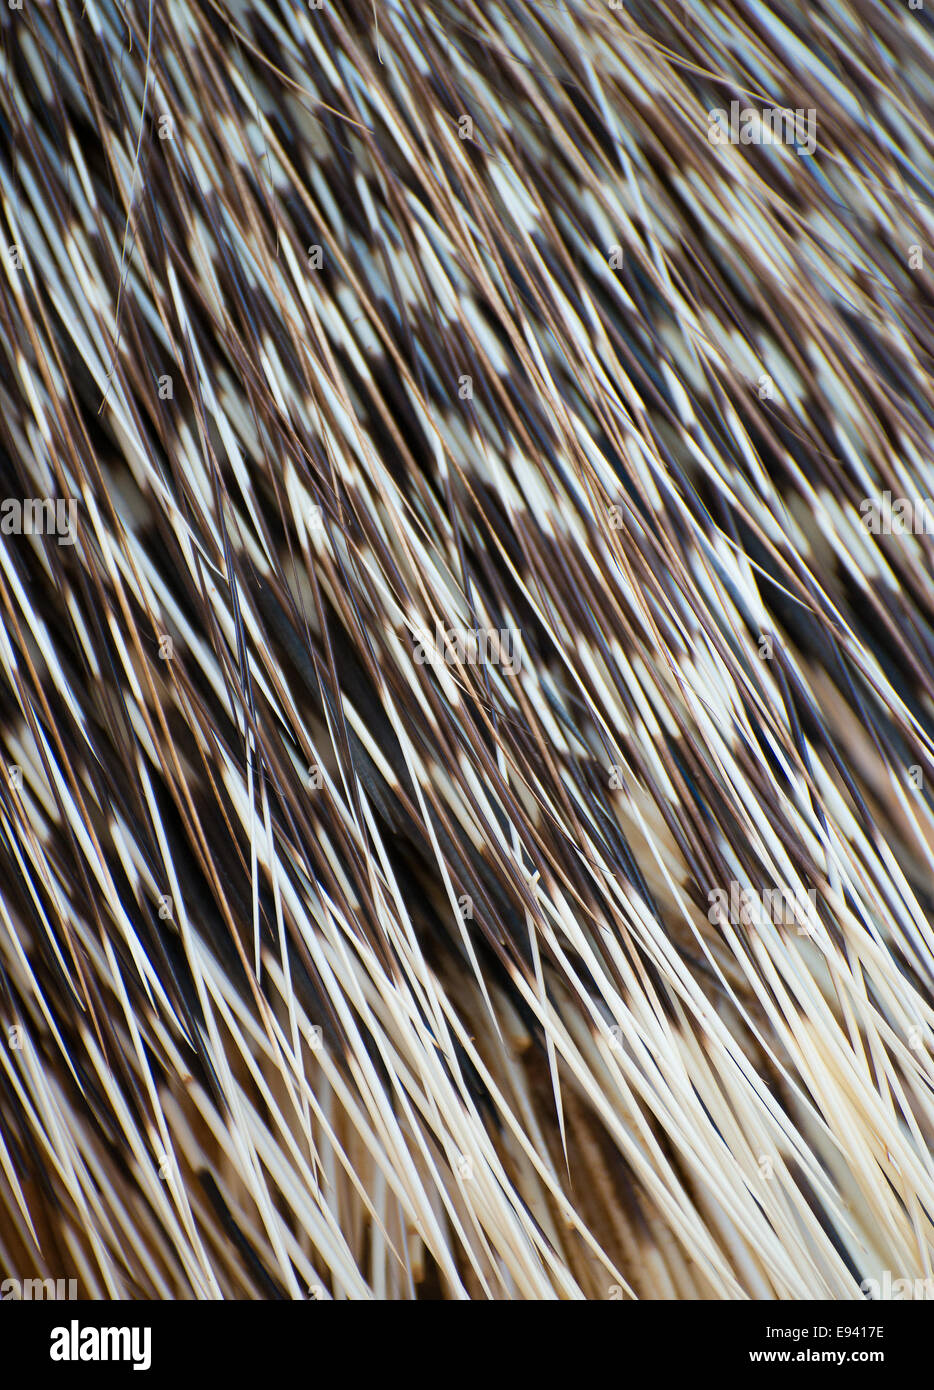 Part of Old World porcupine body with spines. Stock Photo